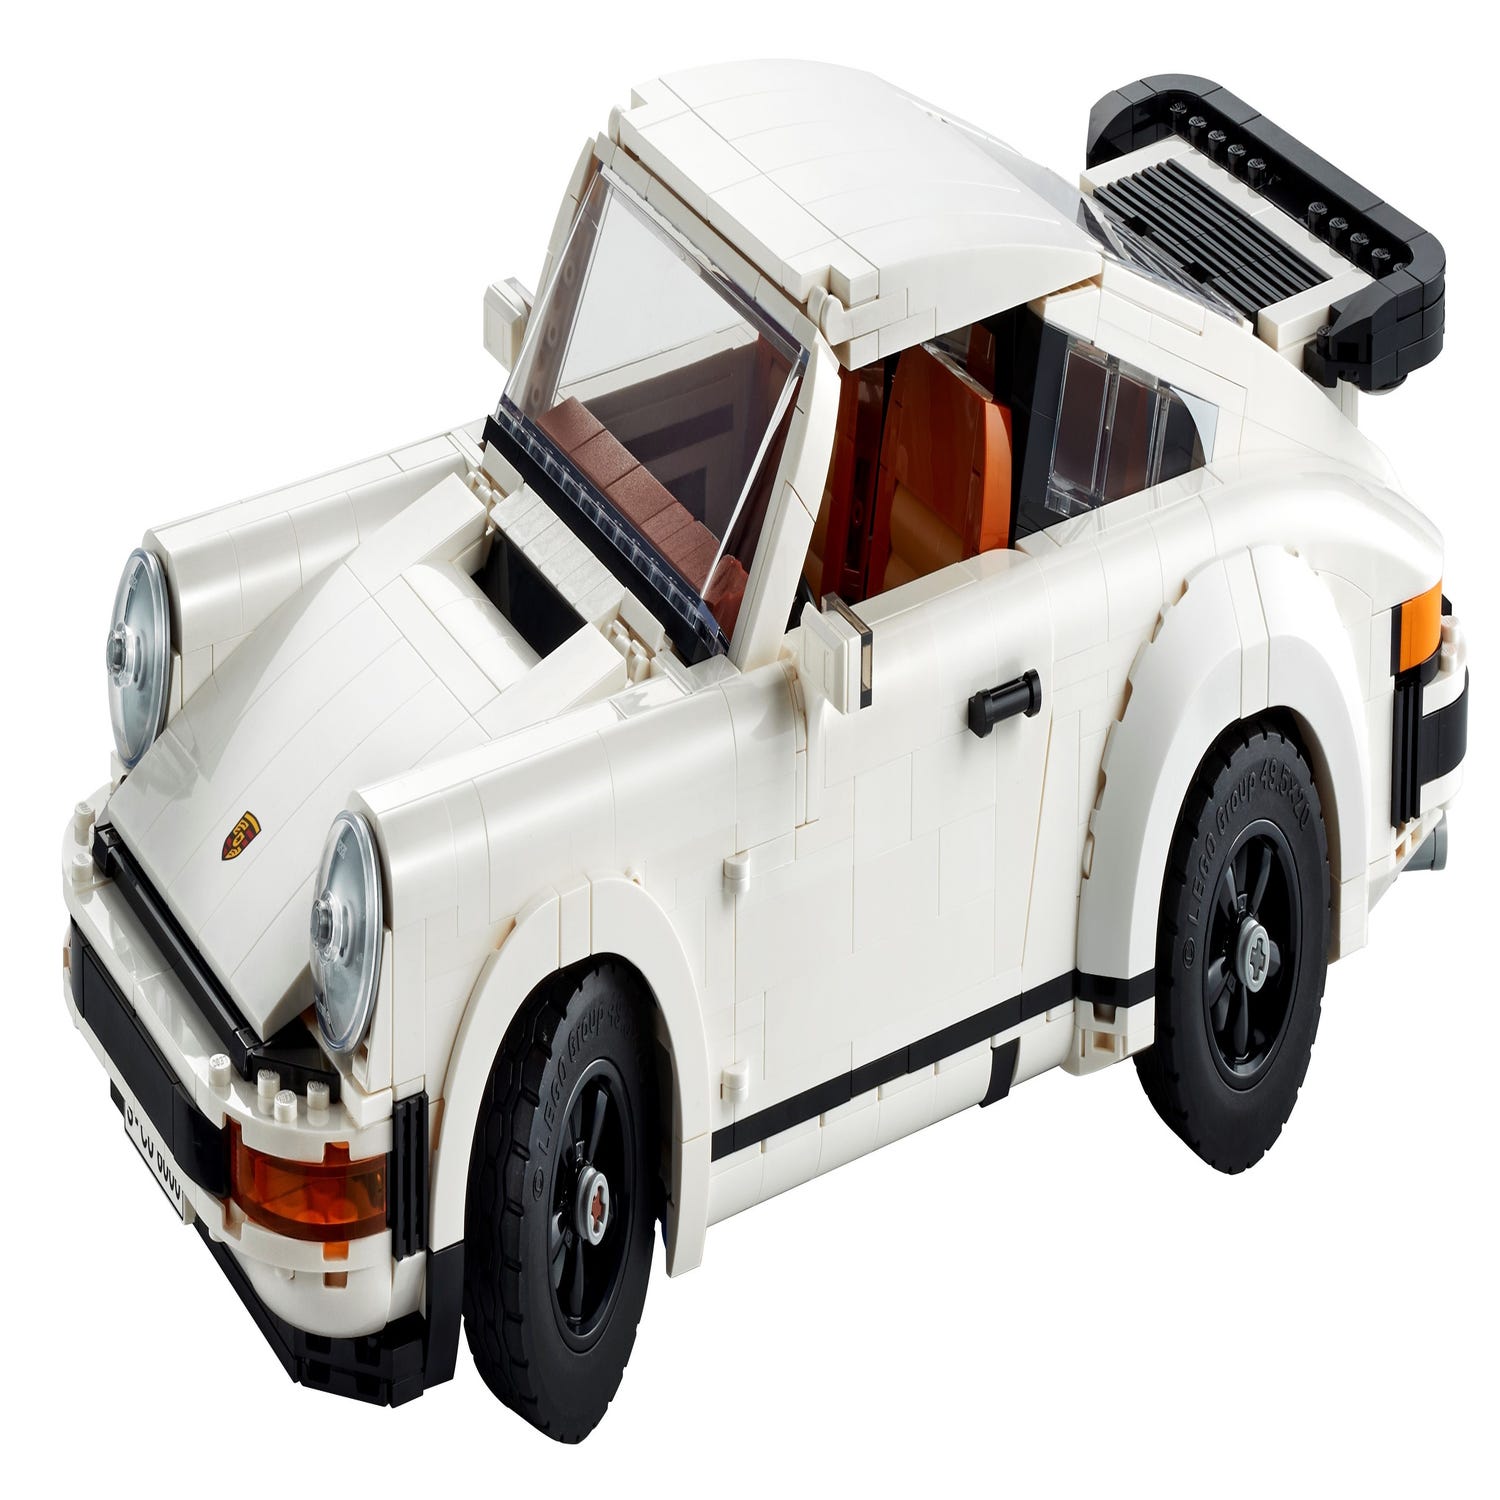 Street Racer 31127 | Creator 3-in-1 | Buy online at the Official LEGO® Shop  US